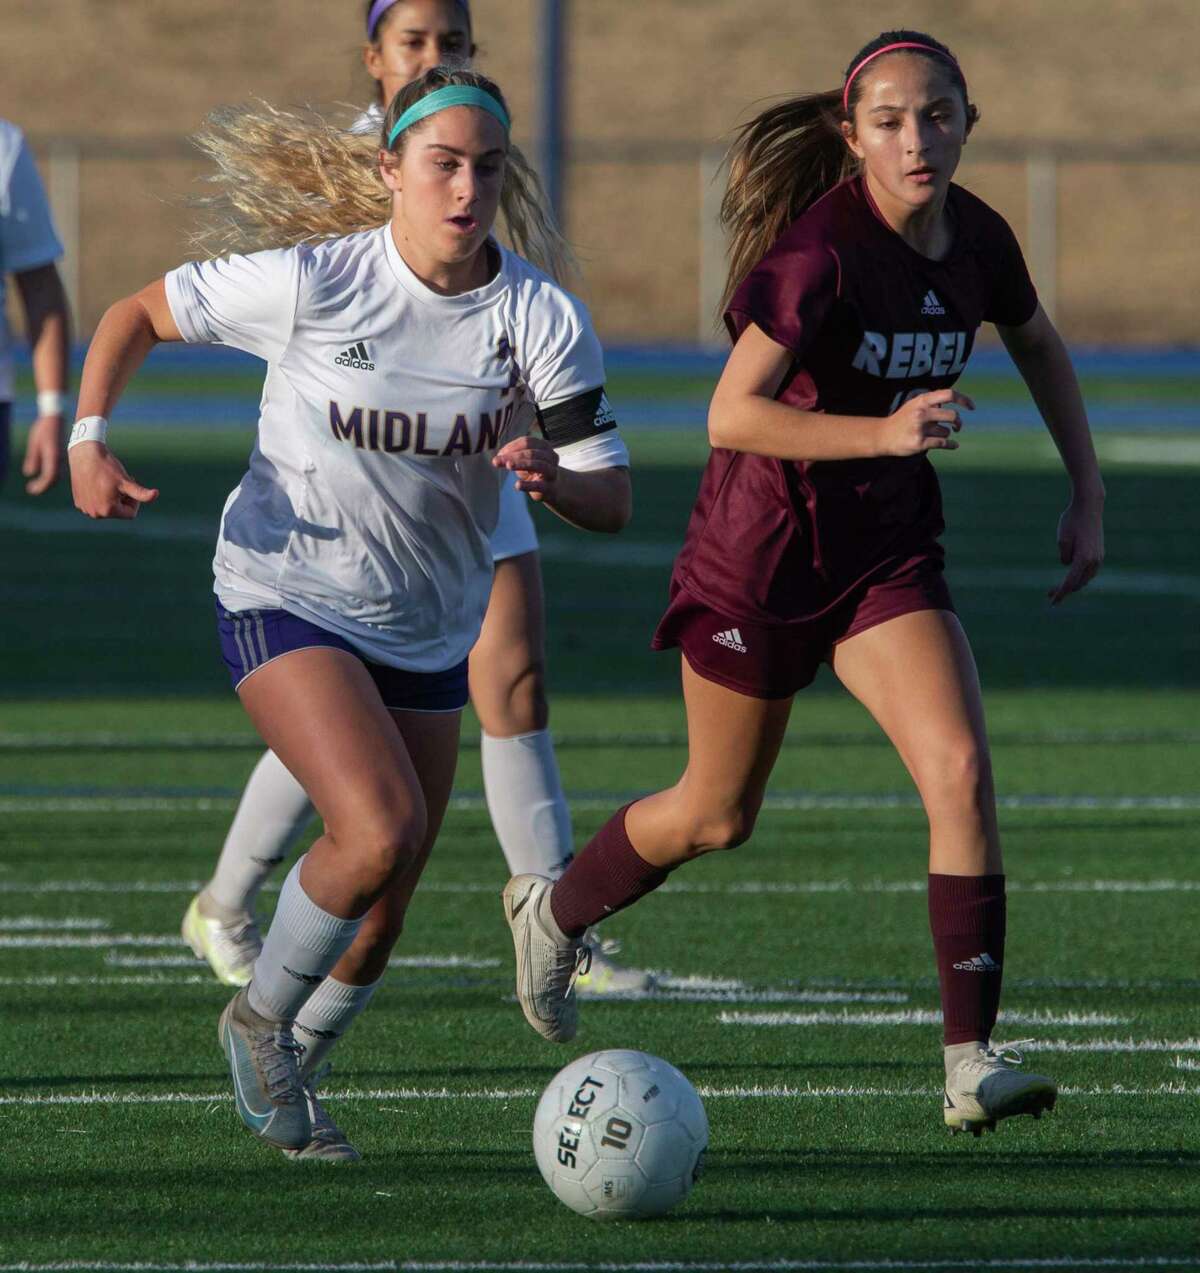 Midland High's Kinsey Hill brings the ball down field as Legacy High's Karli Ramos chases after her 02/08/2022 at Grande Communications Stadium. Tim Fischer/Reporter-Telegram